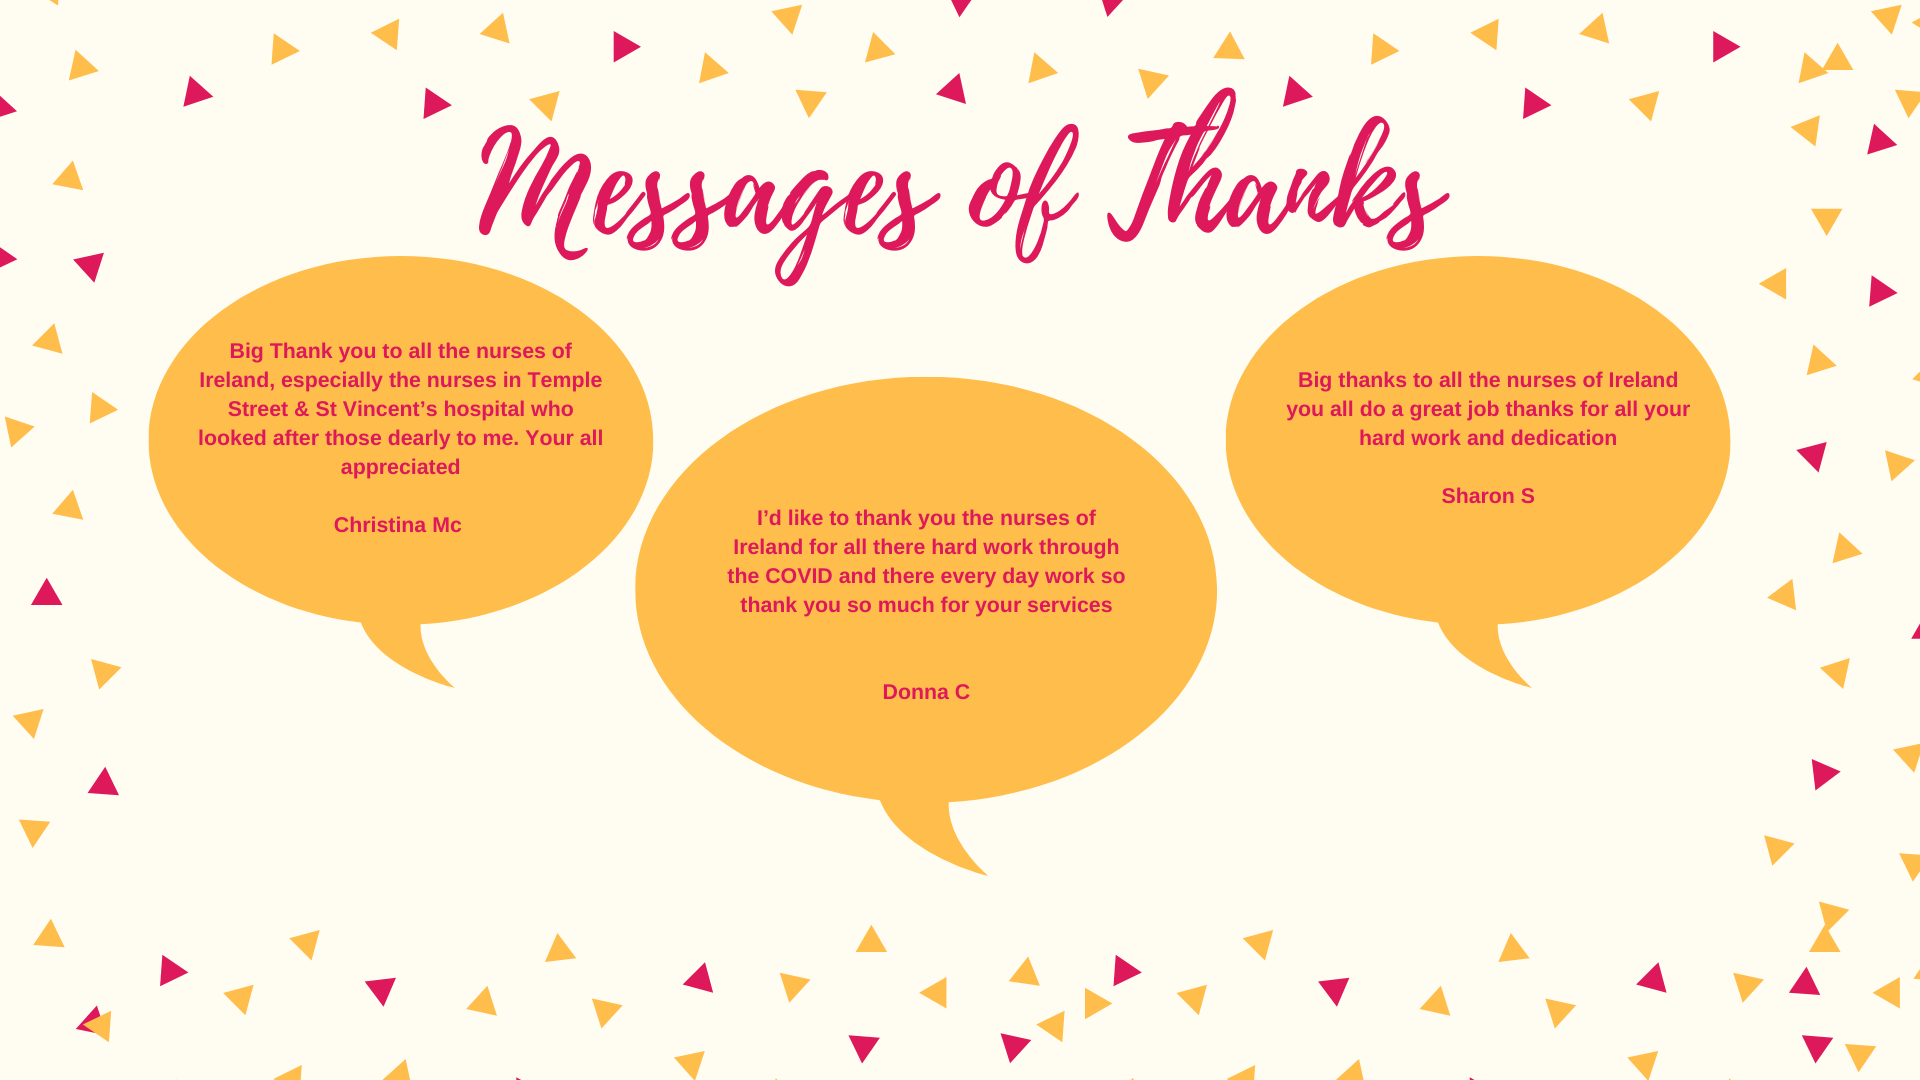 #CN - ,messages of Thanks